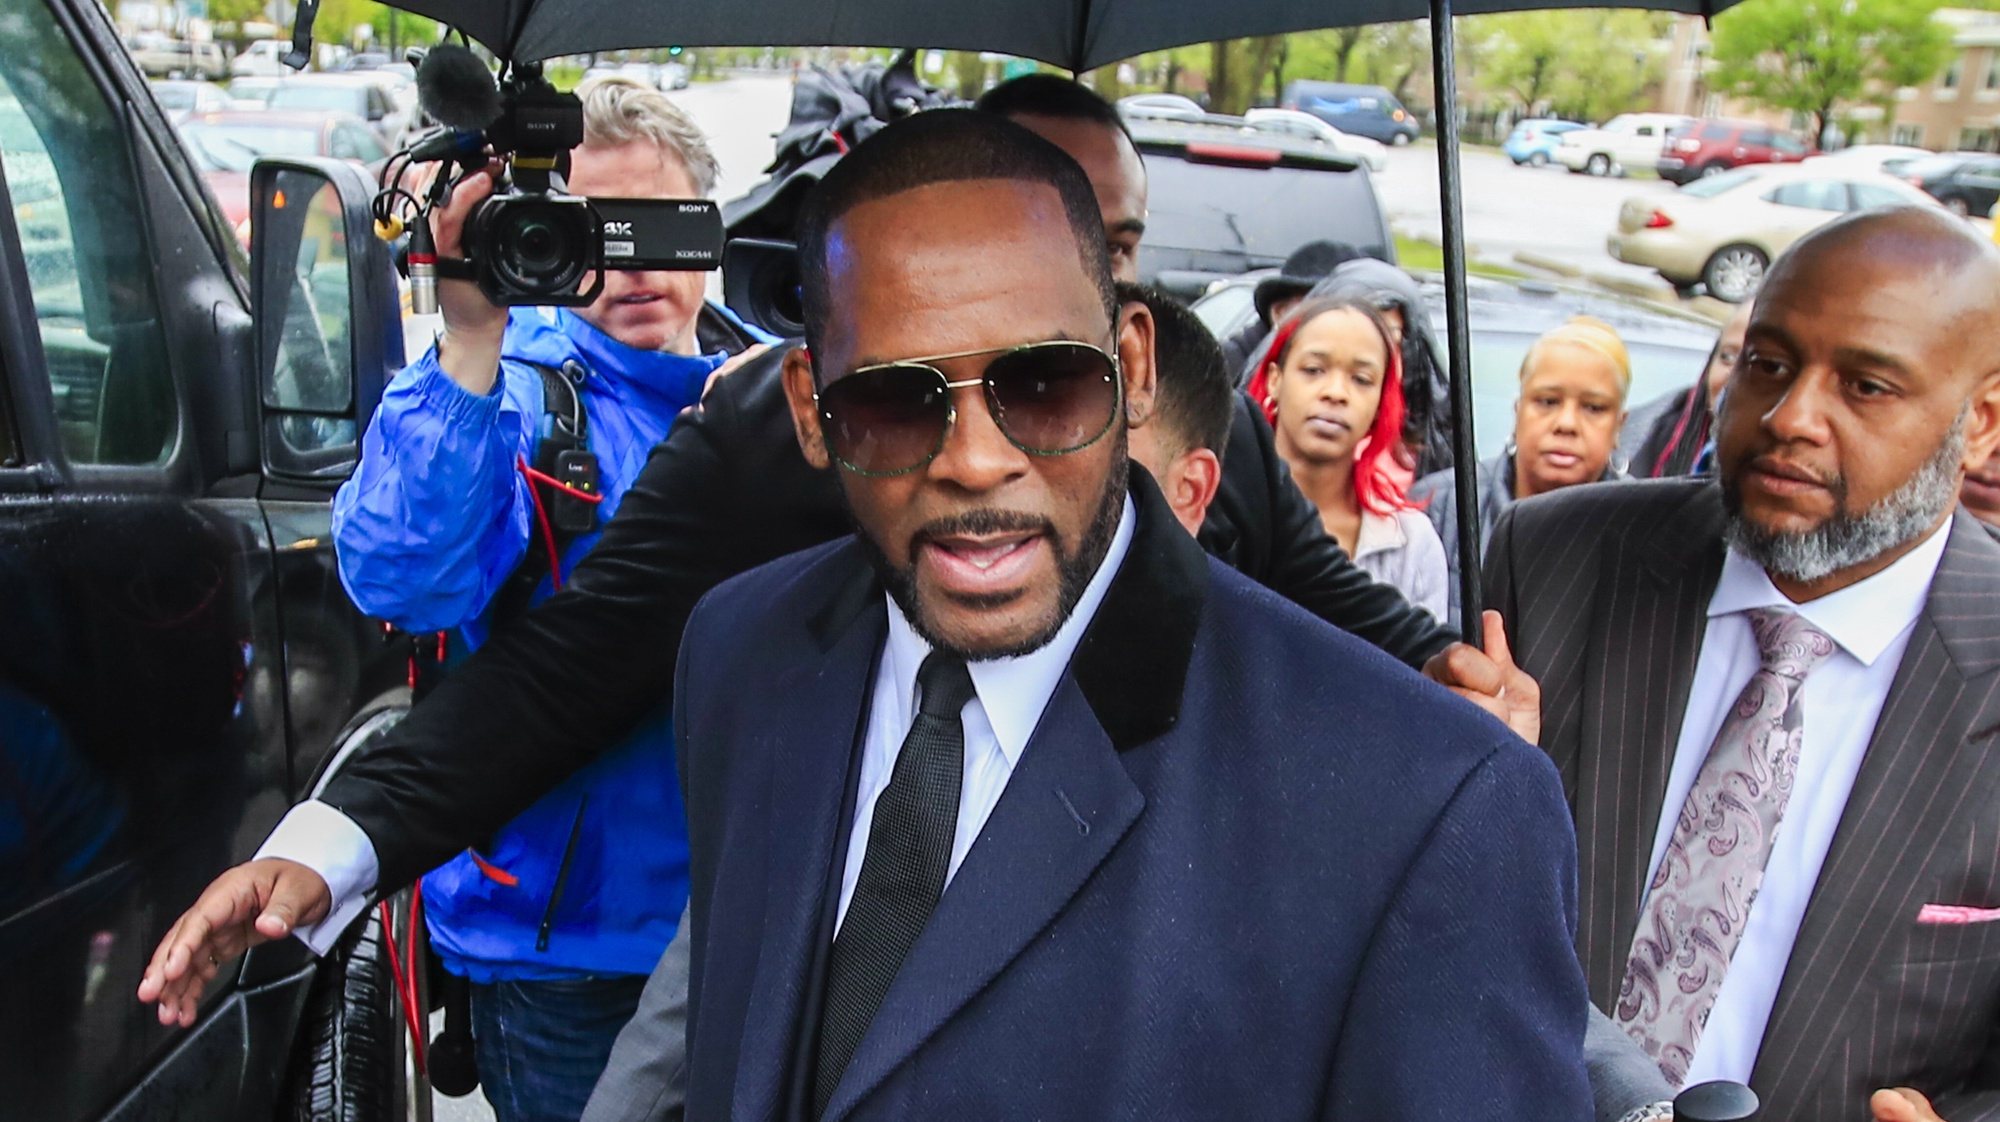 epa09492087 (FILE) - US R&amp;B singer R. Kelly approaches his vehicles as he leaves court at the Leighton Criminal Courts building after a status hearing on his sexual assault charges in Chicago, Illinois, USA, 07 May 2019 (reissued 27 September 2021). R. Kelly, whose full name is Robert Sylvester Kelly, has been found guilty of racketeering and sex trafficking charges by a US jury on 27 September 2021.  EPA/TANNEN MAURY *** Local Caption *** 55175284